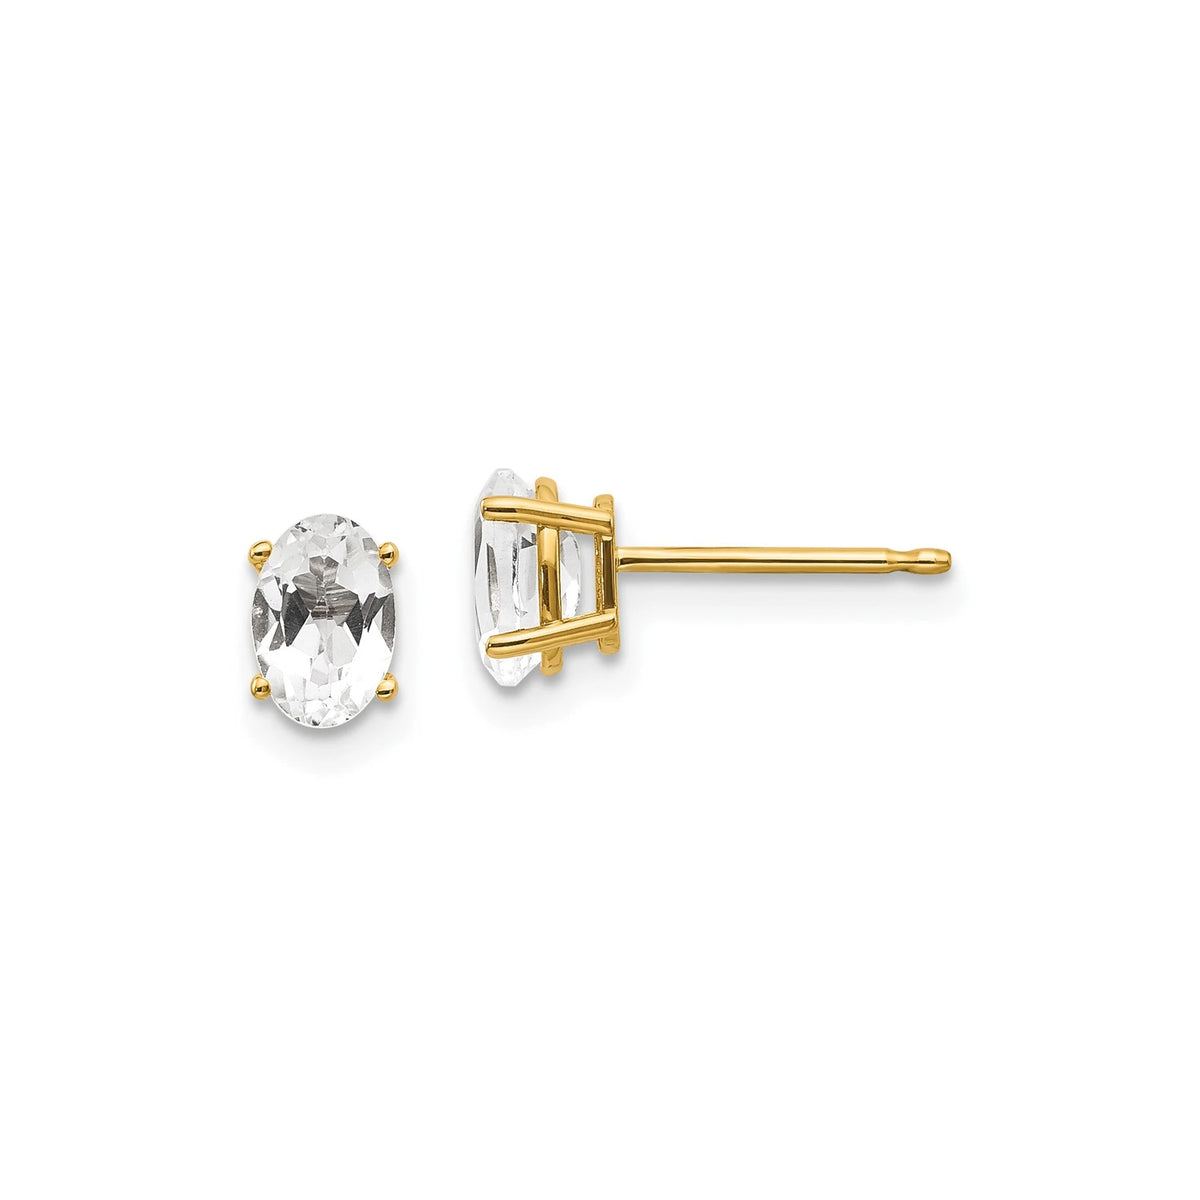 14k Yellow Gold or 14k White Gold 6x4mm Topaz Earrings April Birthstone Studs- Gift Box Included - Ships Next Business Day